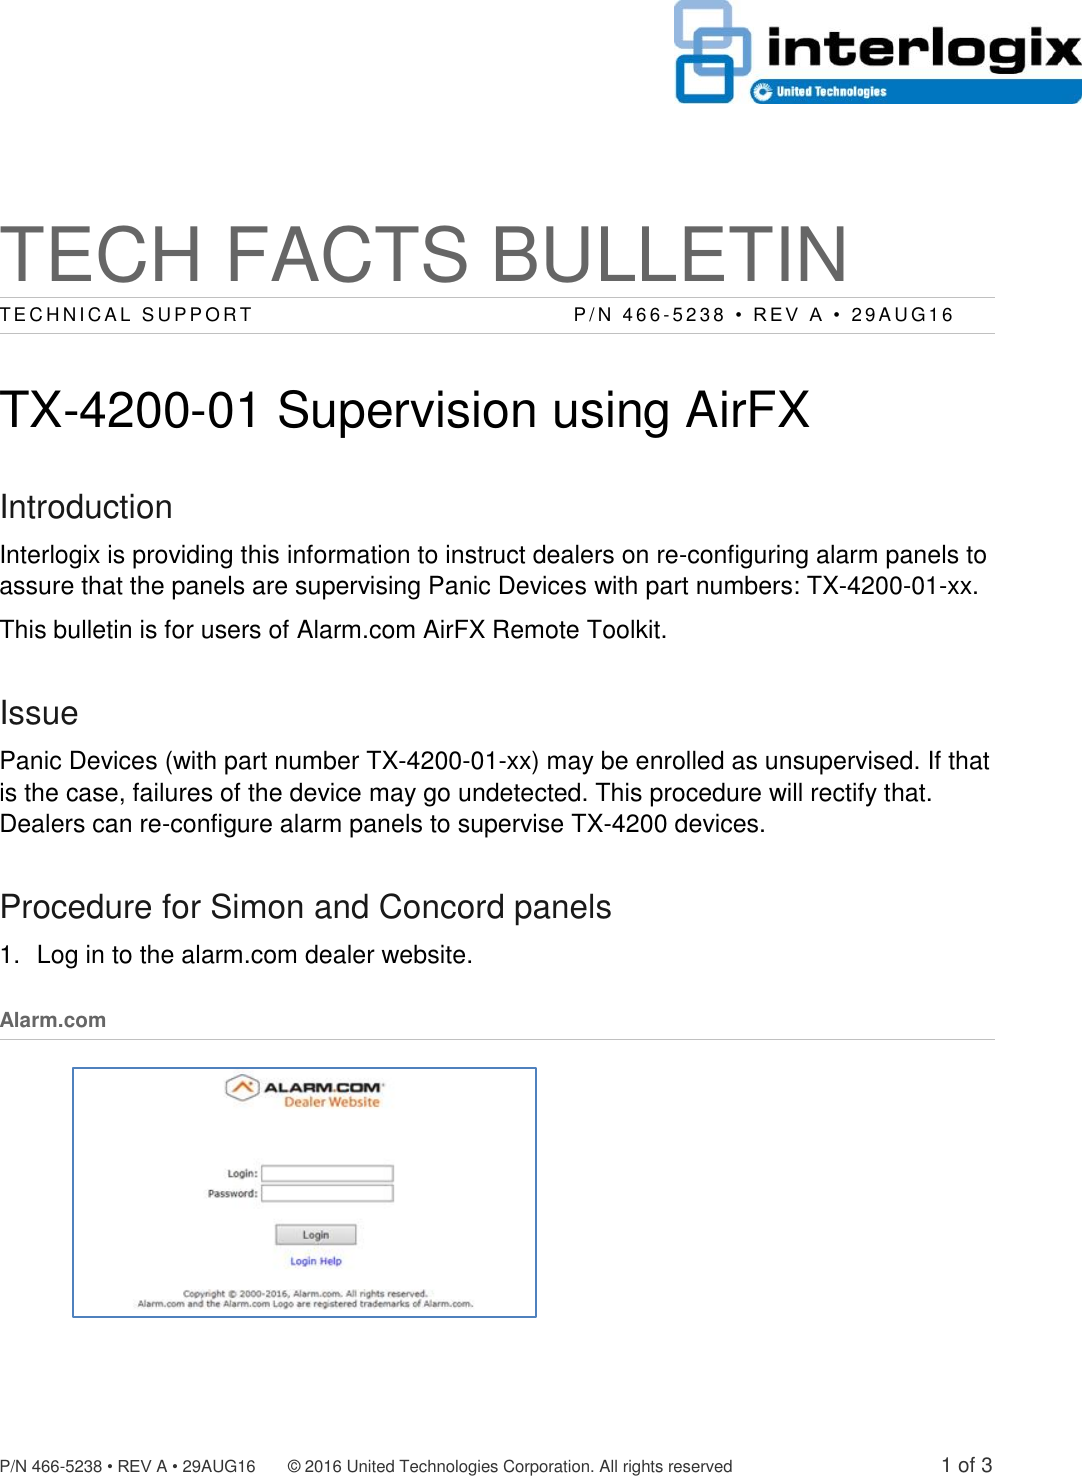 Page 1 of 3 - InterLogix 466-5238-Bulletin Panic-Device-Supervision-Airfx Product User Manual